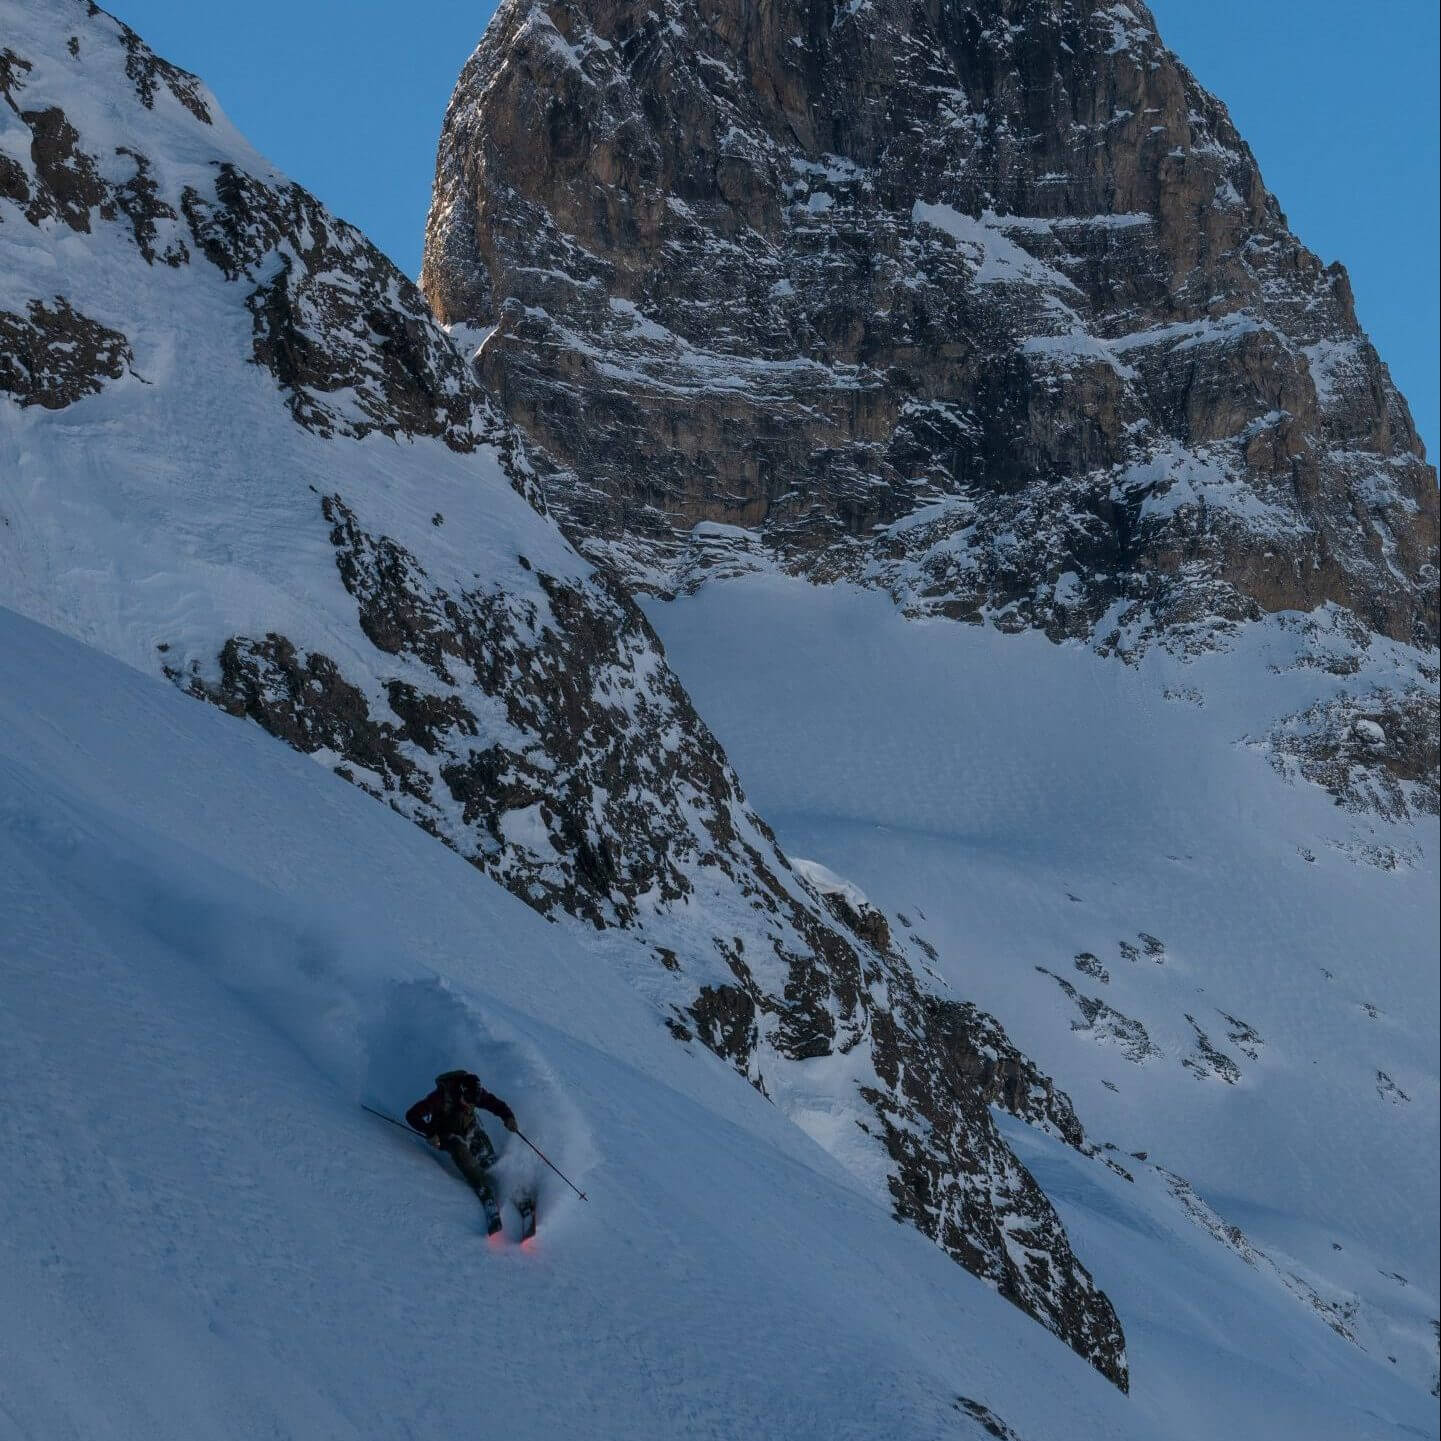 Skier skiing powder under a large rock face